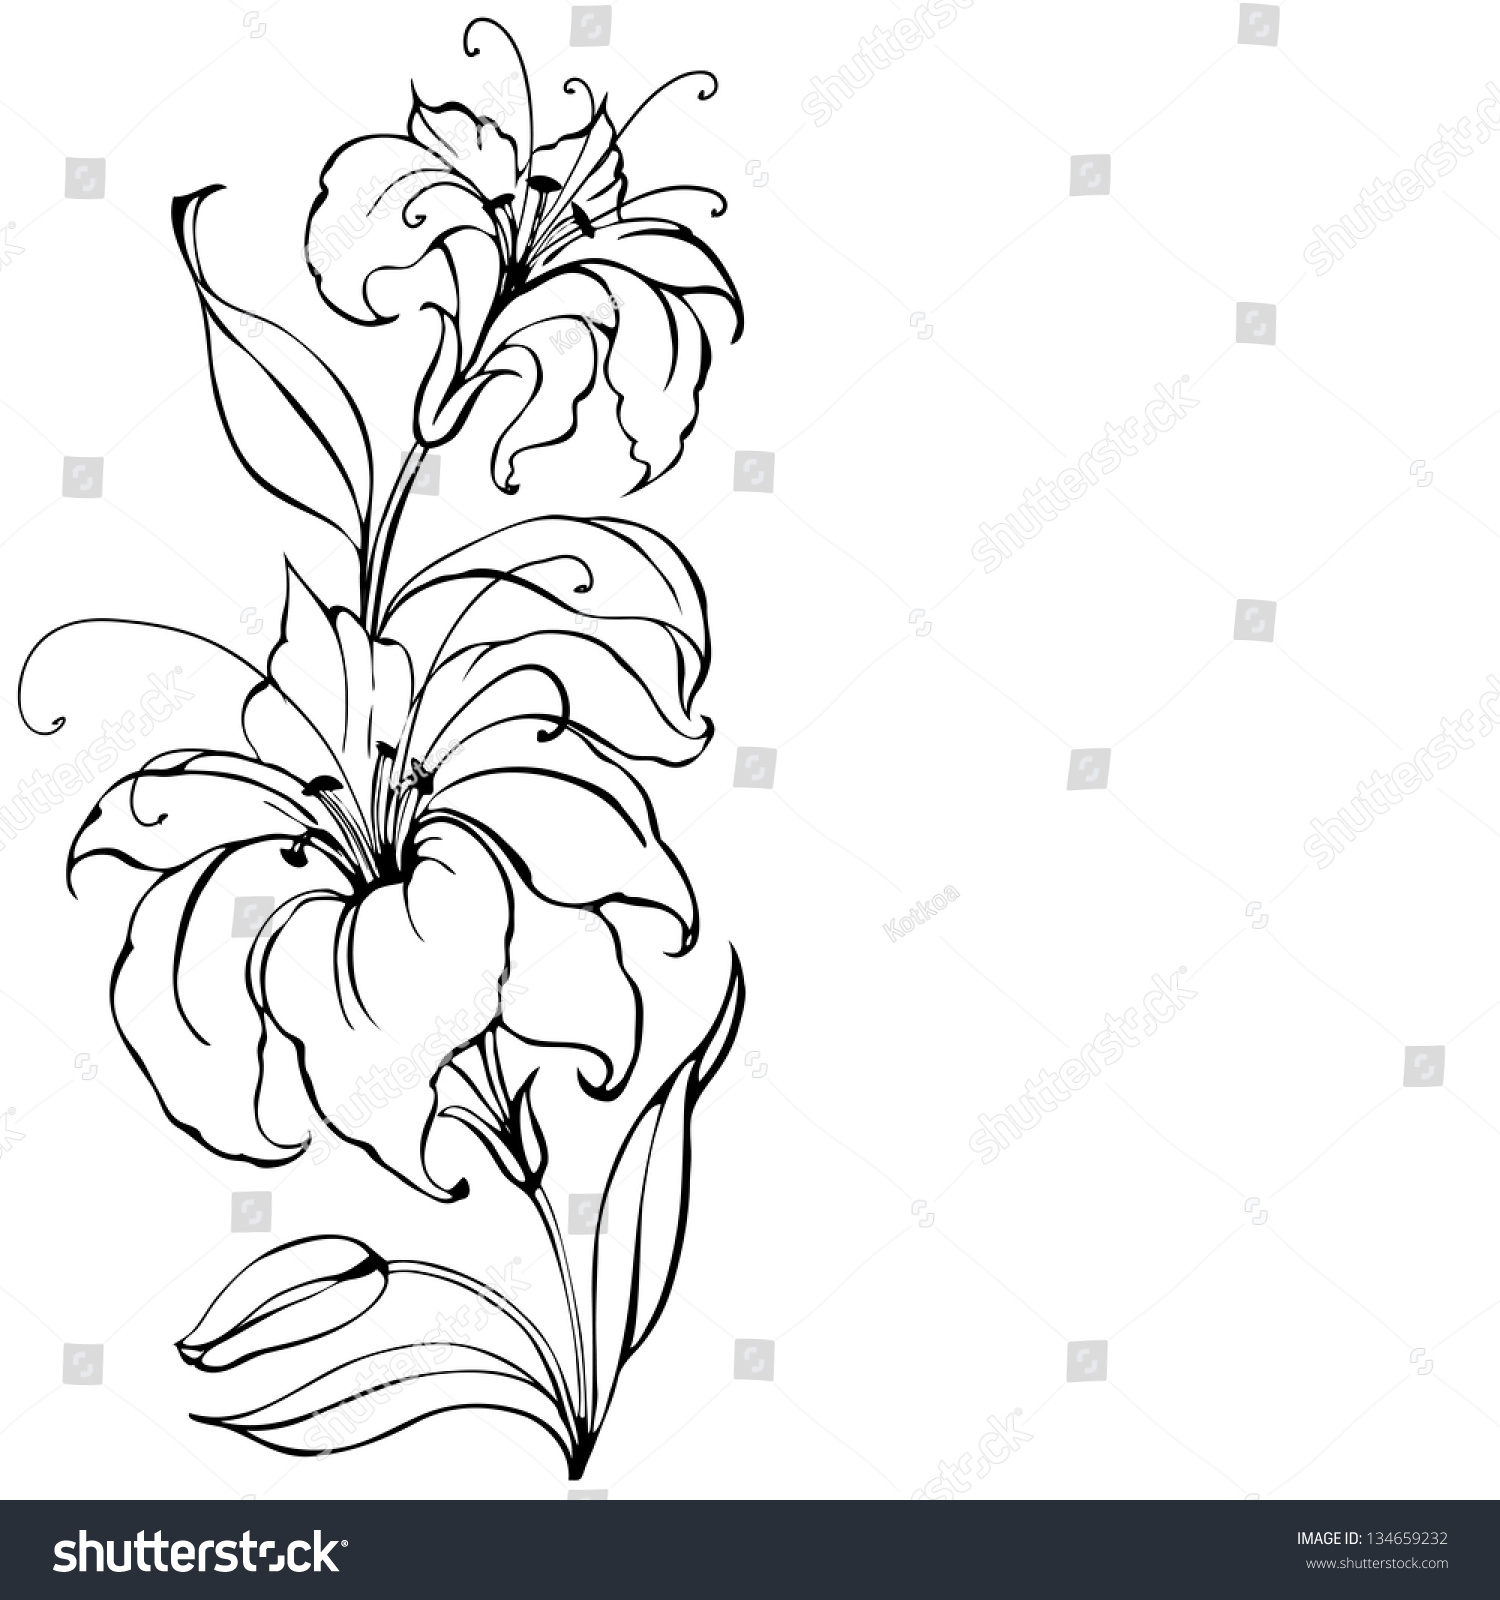 Lily Flower Isolated Over White Vector Stock Vector 134659232